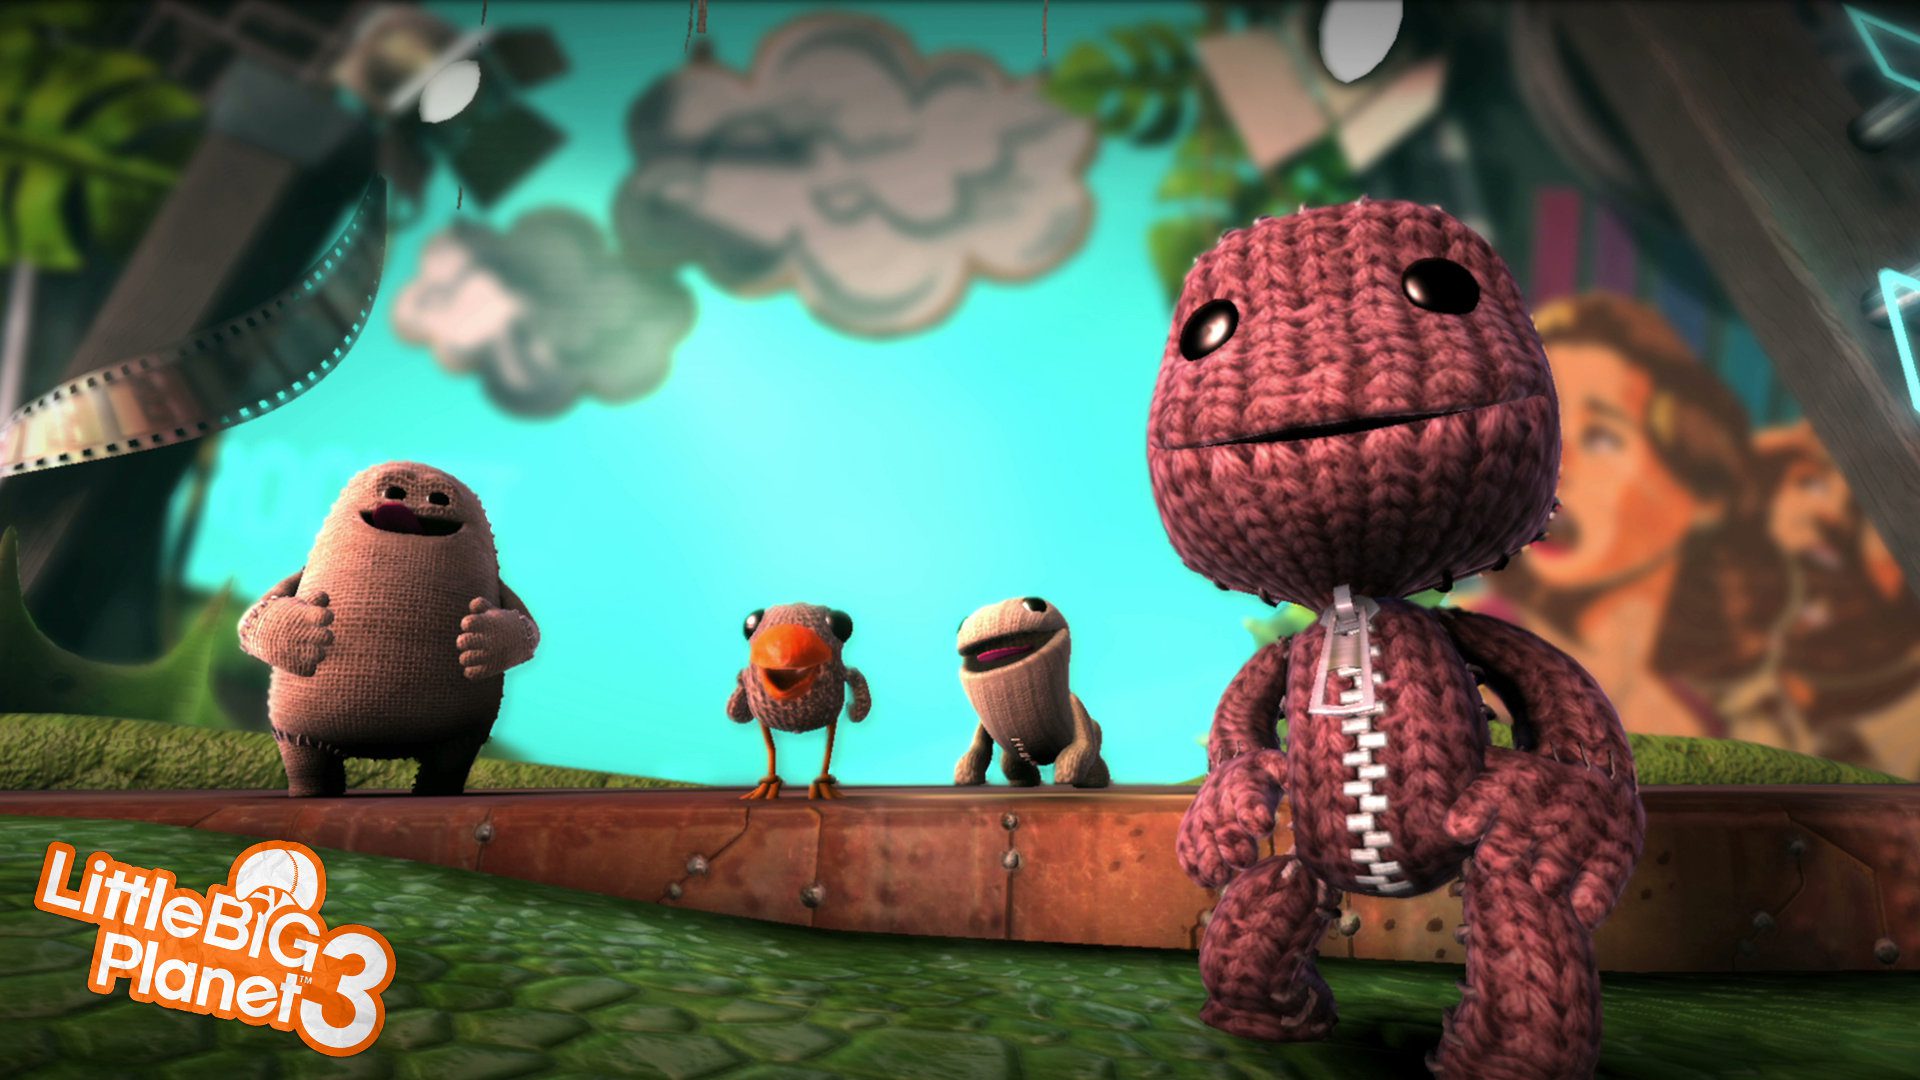 LittleBigPlanet 3 players can no longer download or share levels when servers are offline